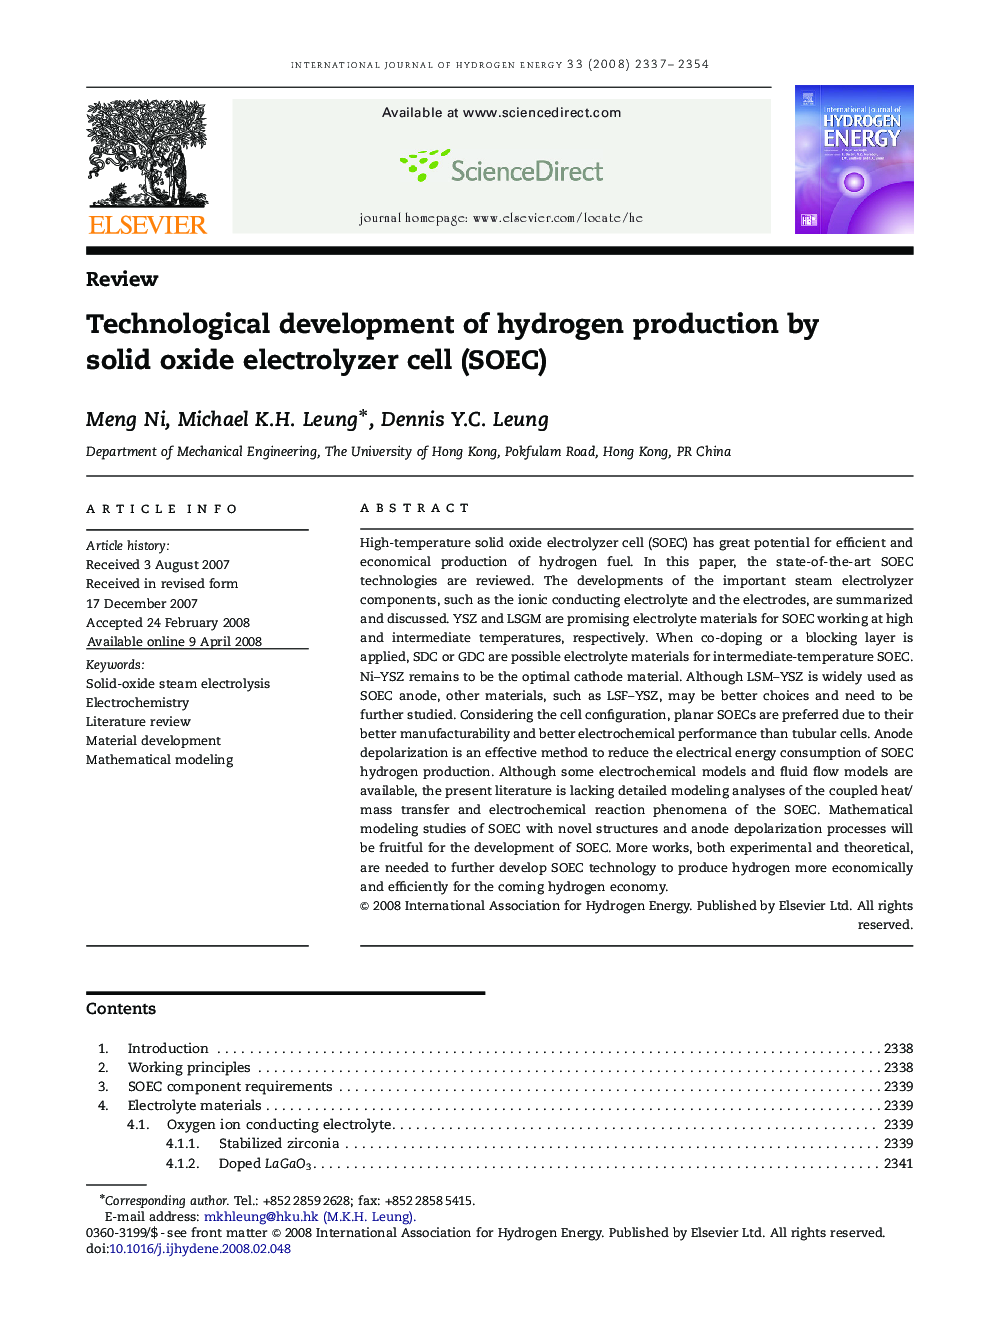 Technological development of hydrogen production by solid oxide electrolyzer cell (SOEC)